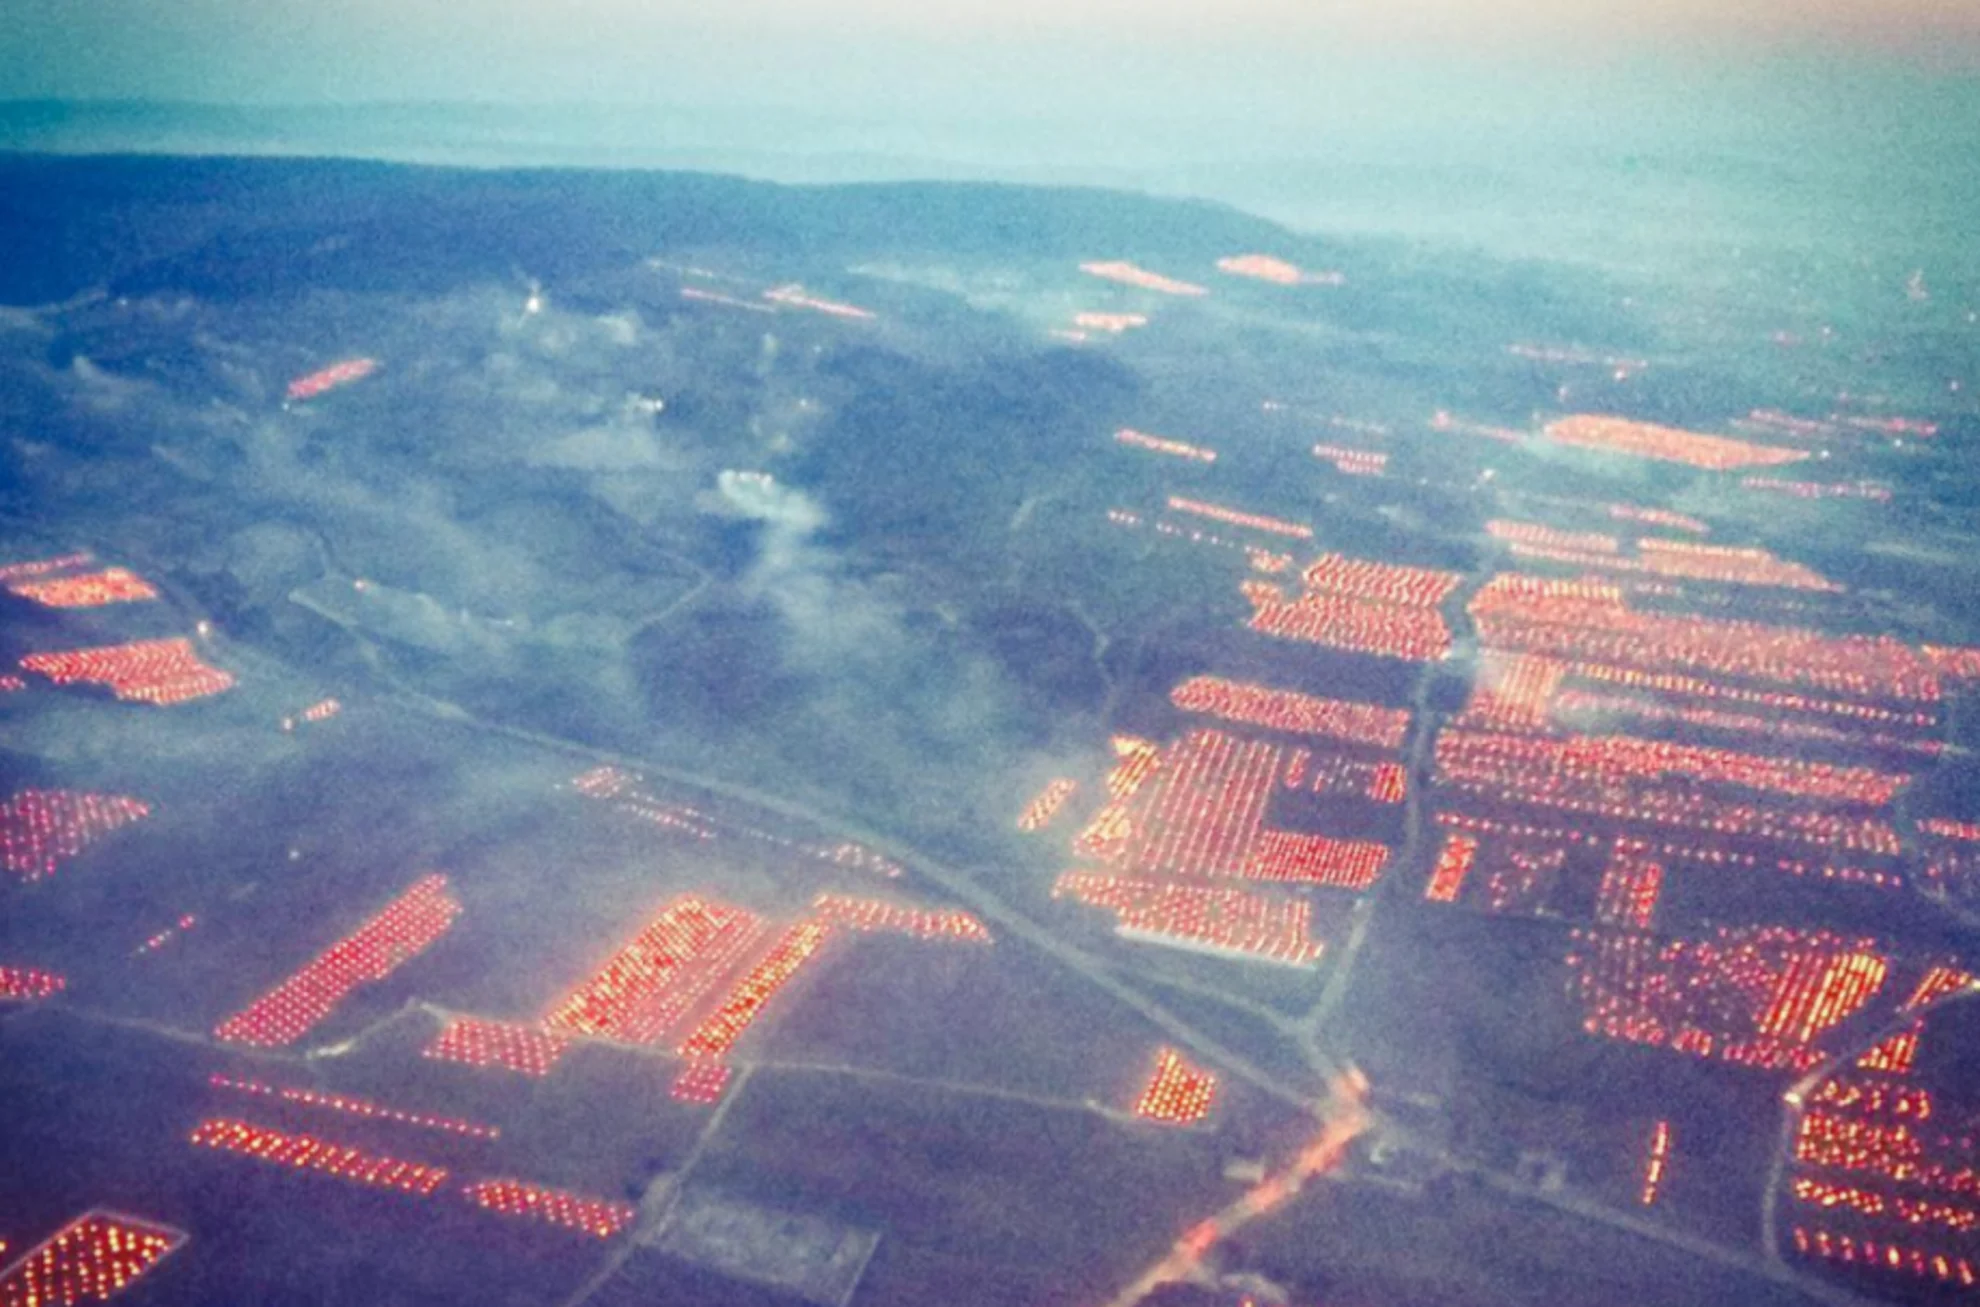 Winemakers in France lit oil drums across their vineyard to avoid frost damage